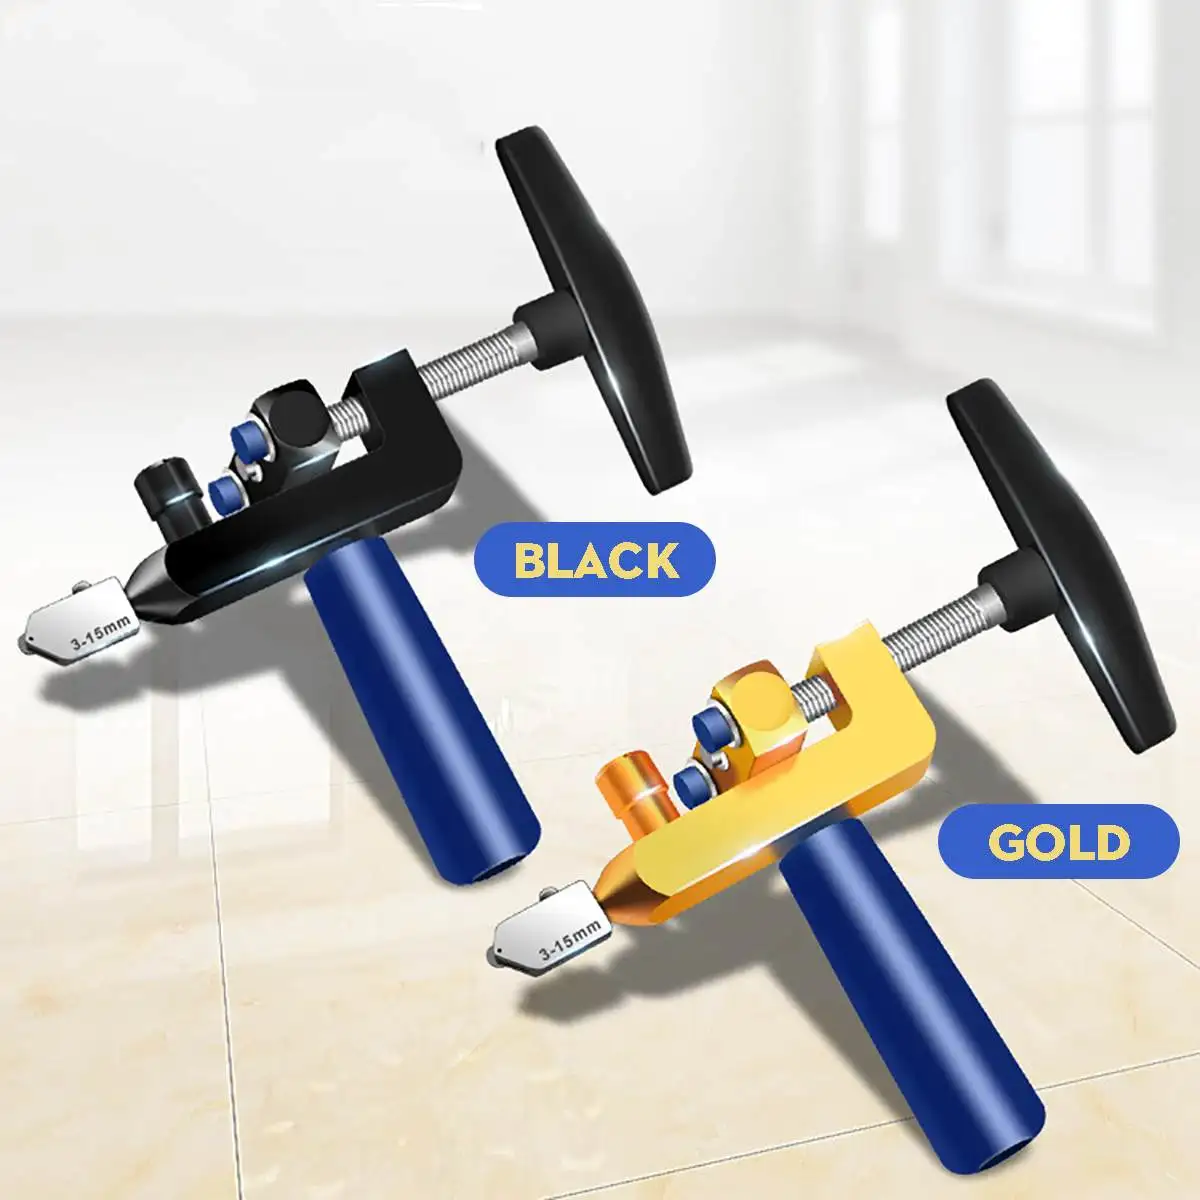 8PCS Professional Easy Glide Glass Tile Cutter 2 In 1 Ceramic Tile Glass Cutting Tool Portable Construction Cutter Tool DropShip